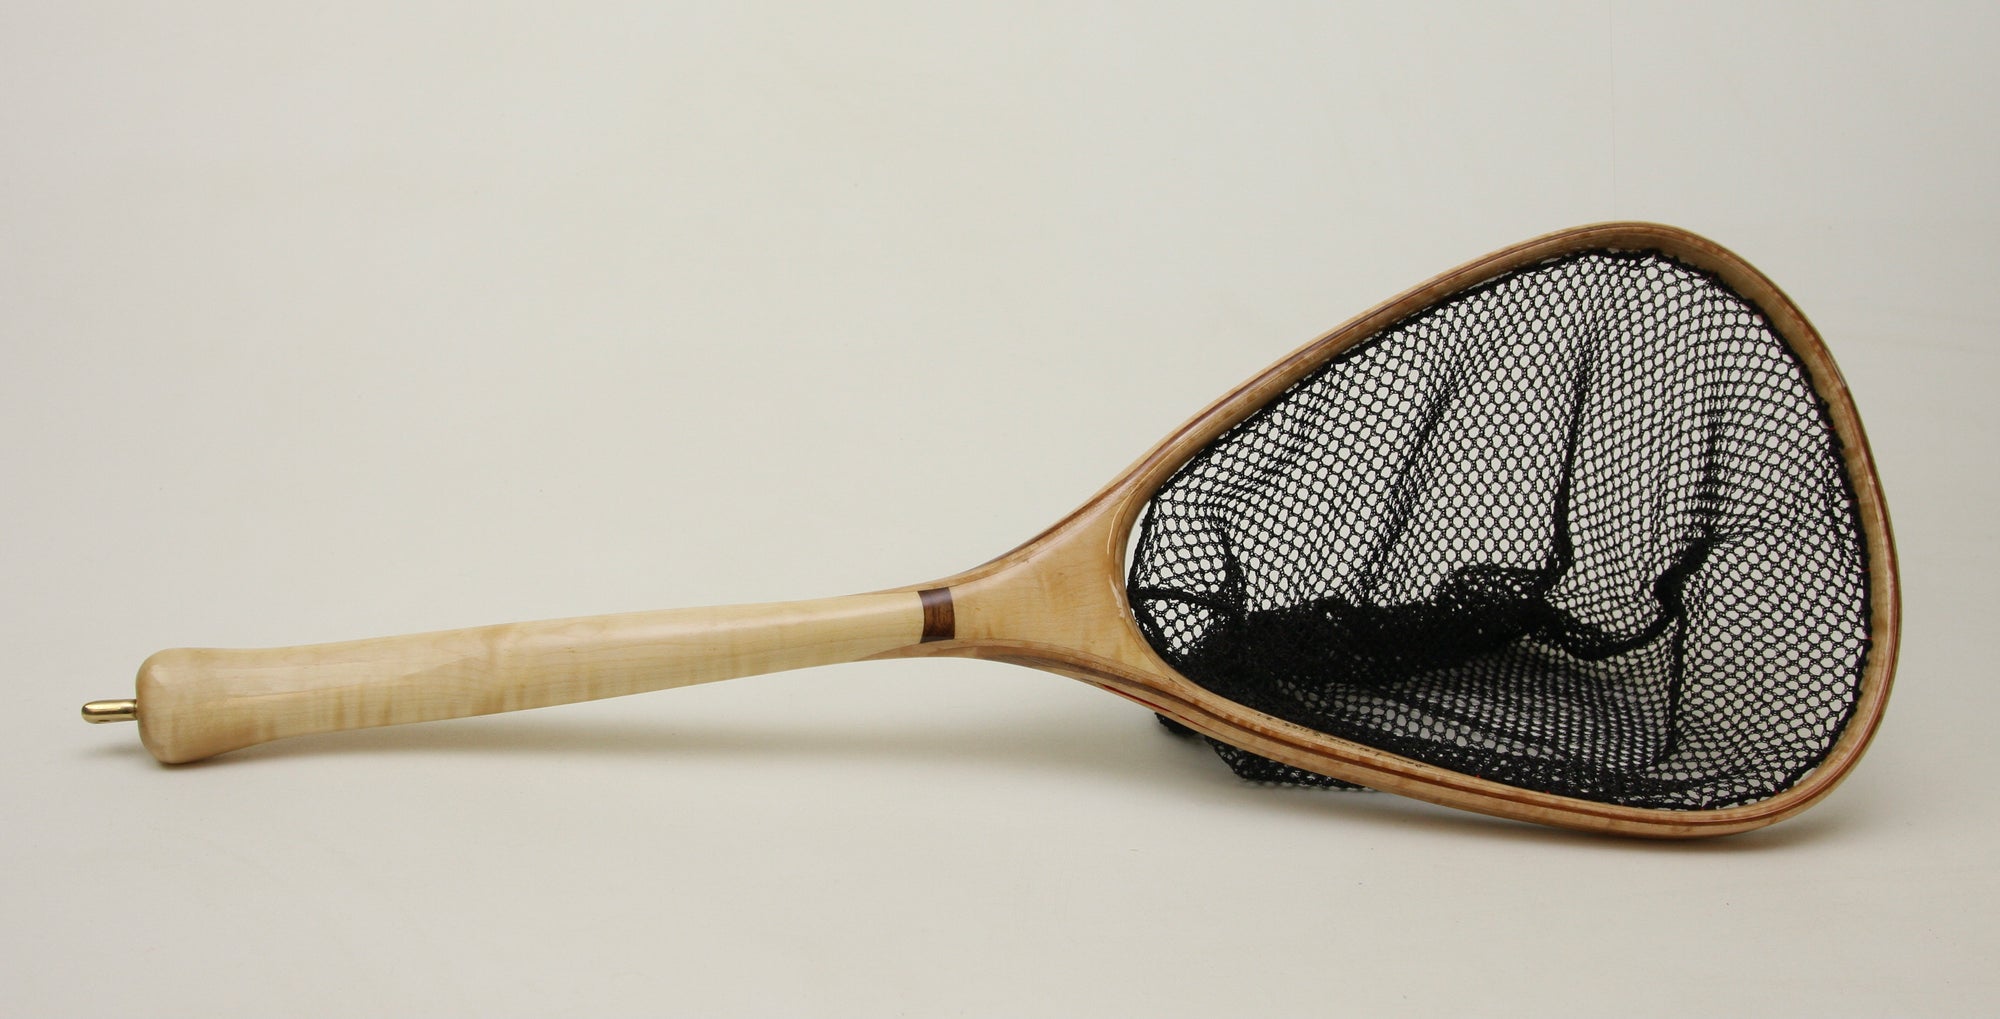 Small Tenkara-style wooden landing net: Curly Maple with an accents of walnut